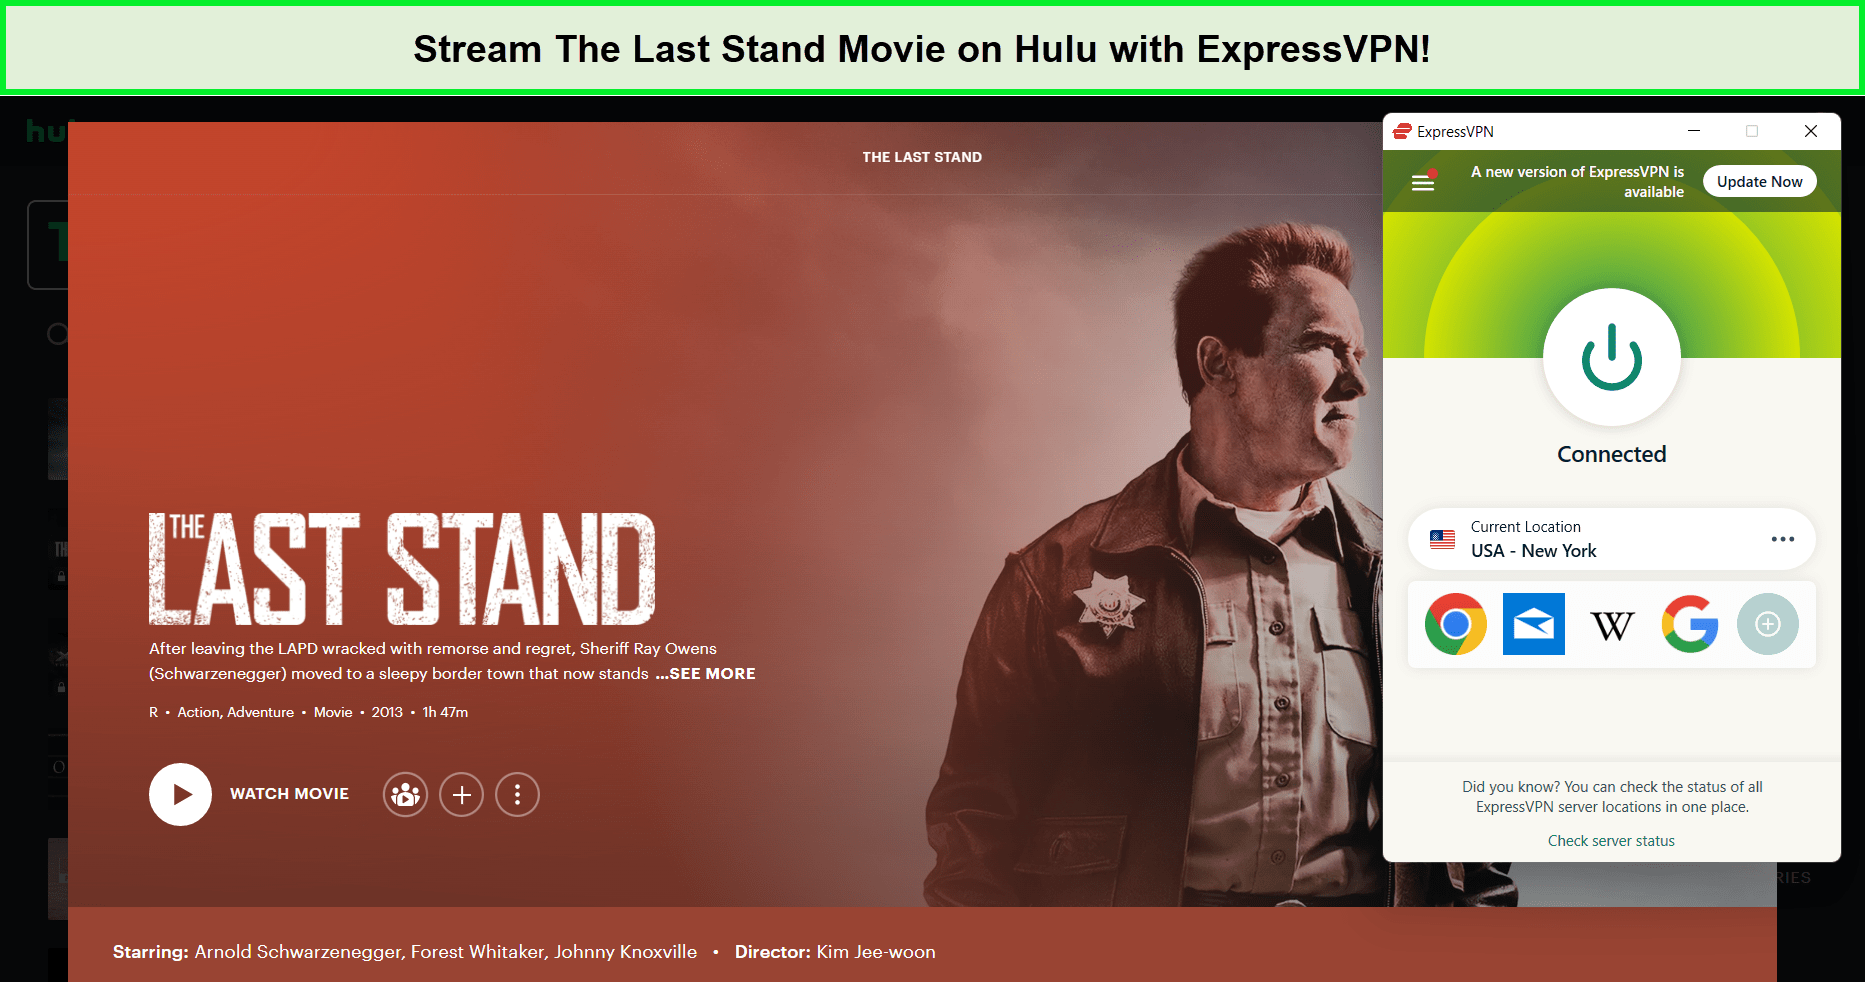 With-ExpressVPN-Watch-The-Last-Stand-Movie-on-Hulu-in-India